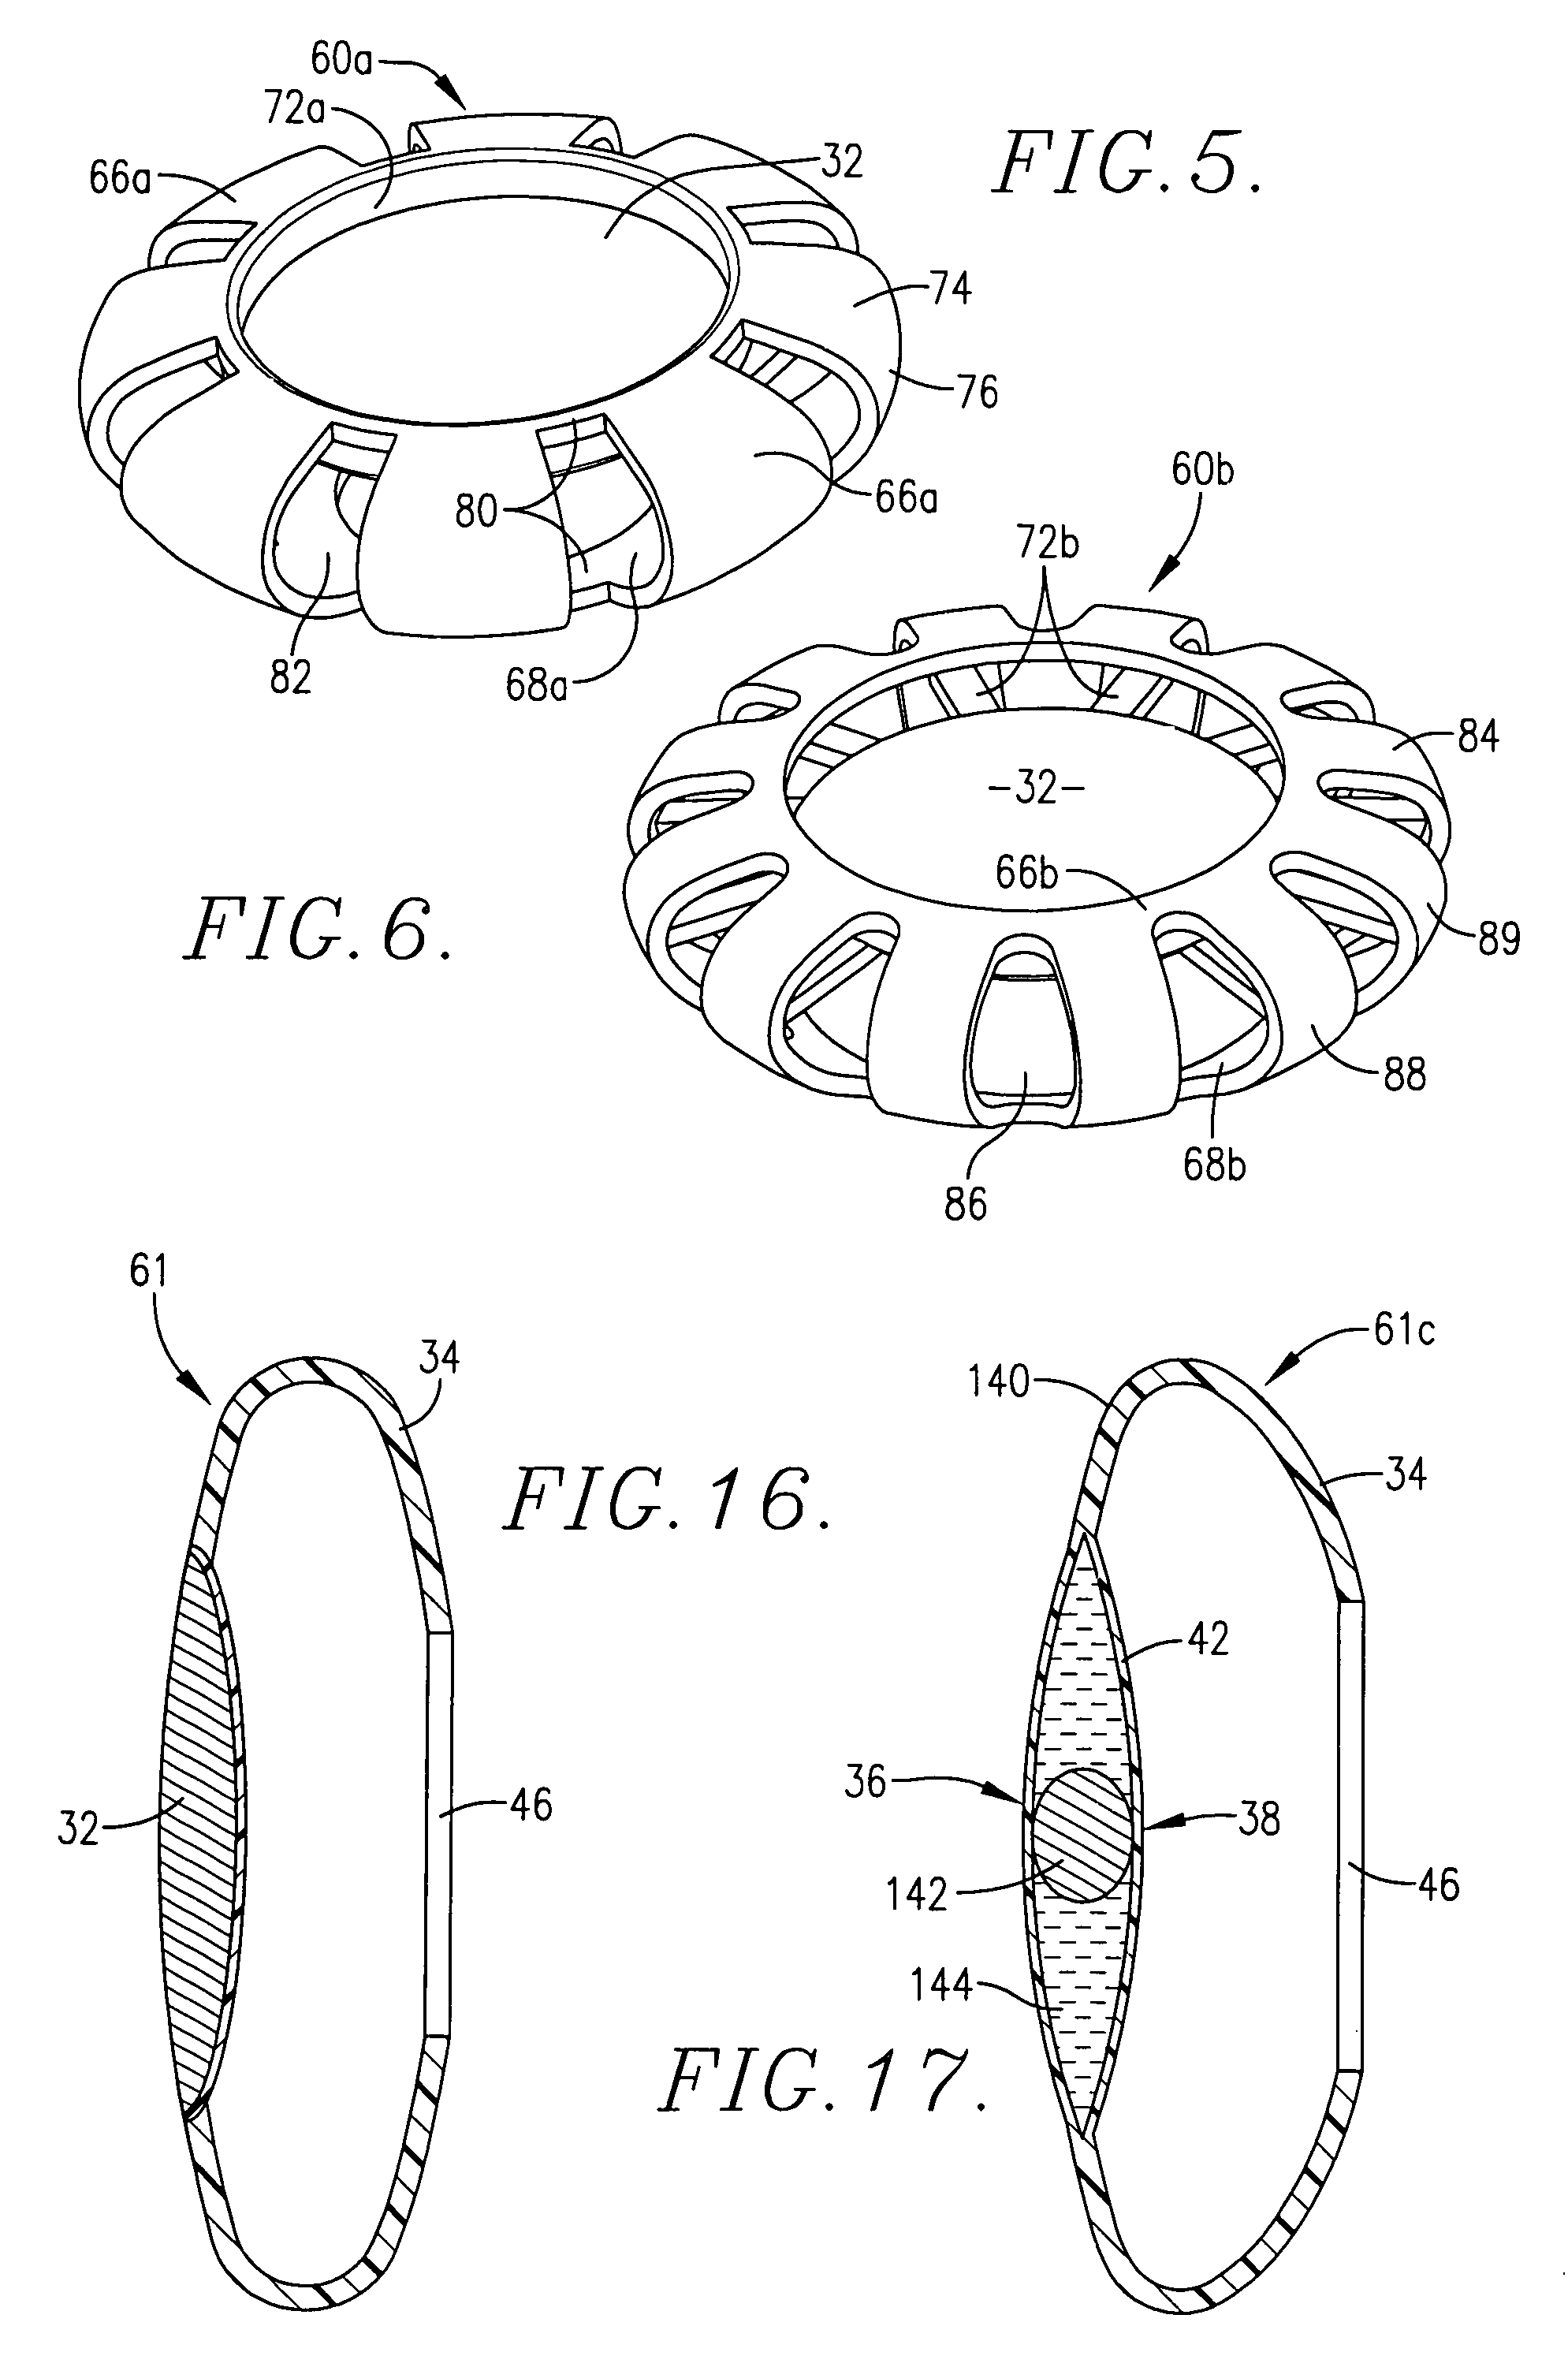 Capsular intraocular lens implant having a refractive liquid therein